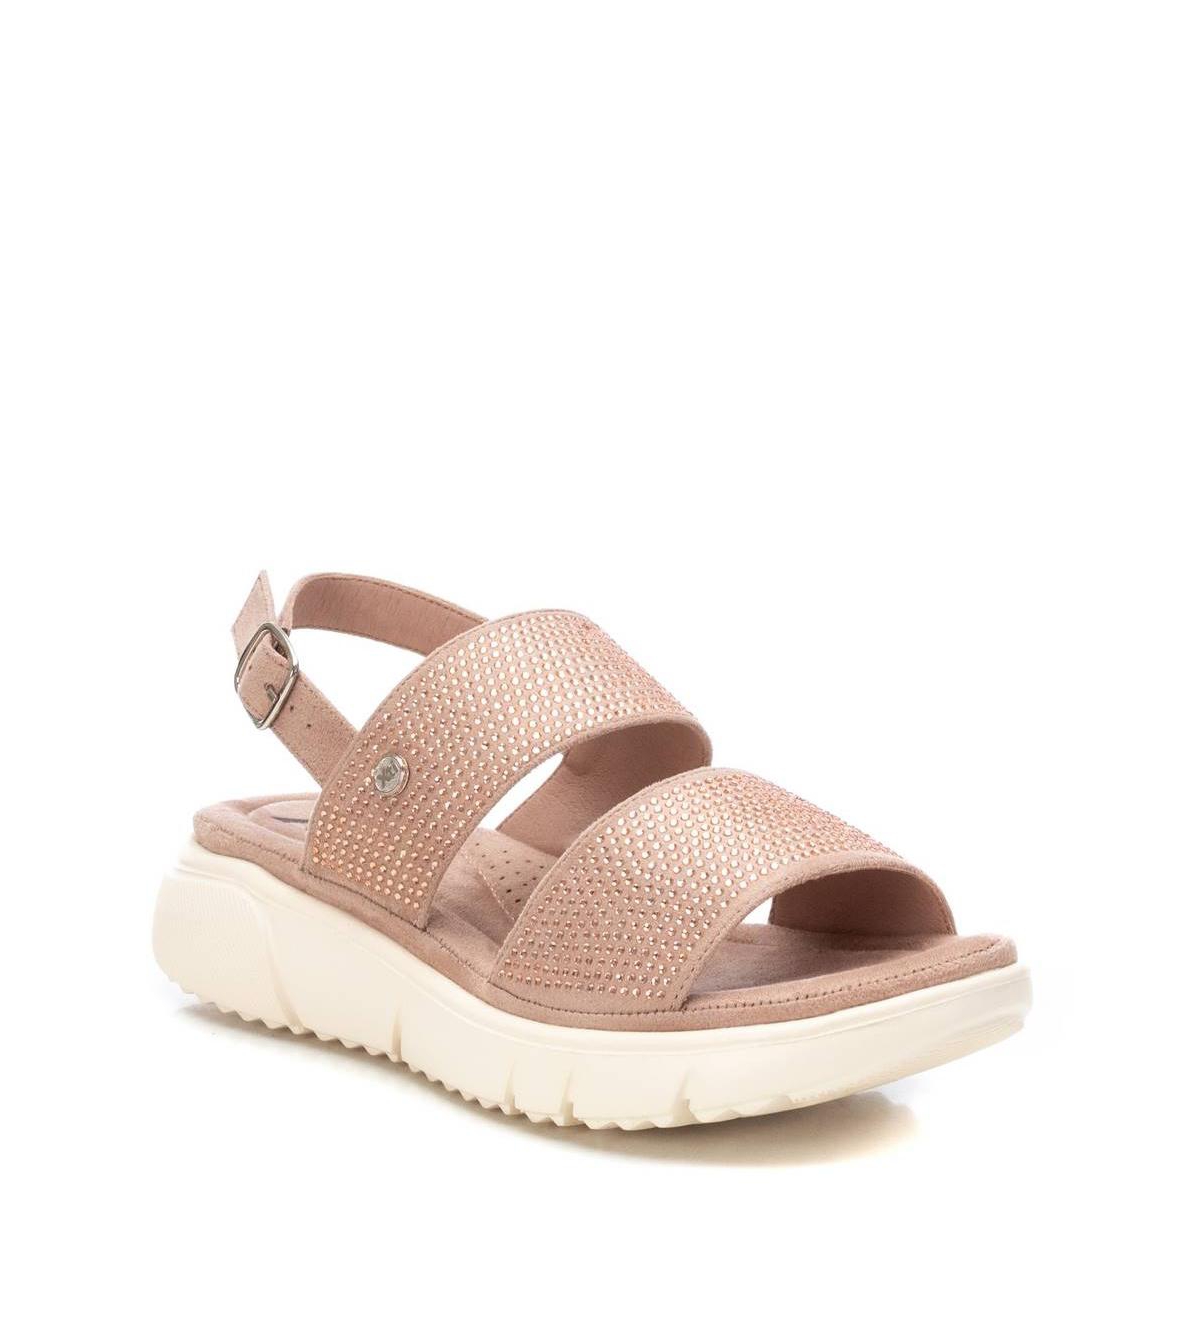 Women's Flat Suede Sandals By Xti - Light/pastel pink